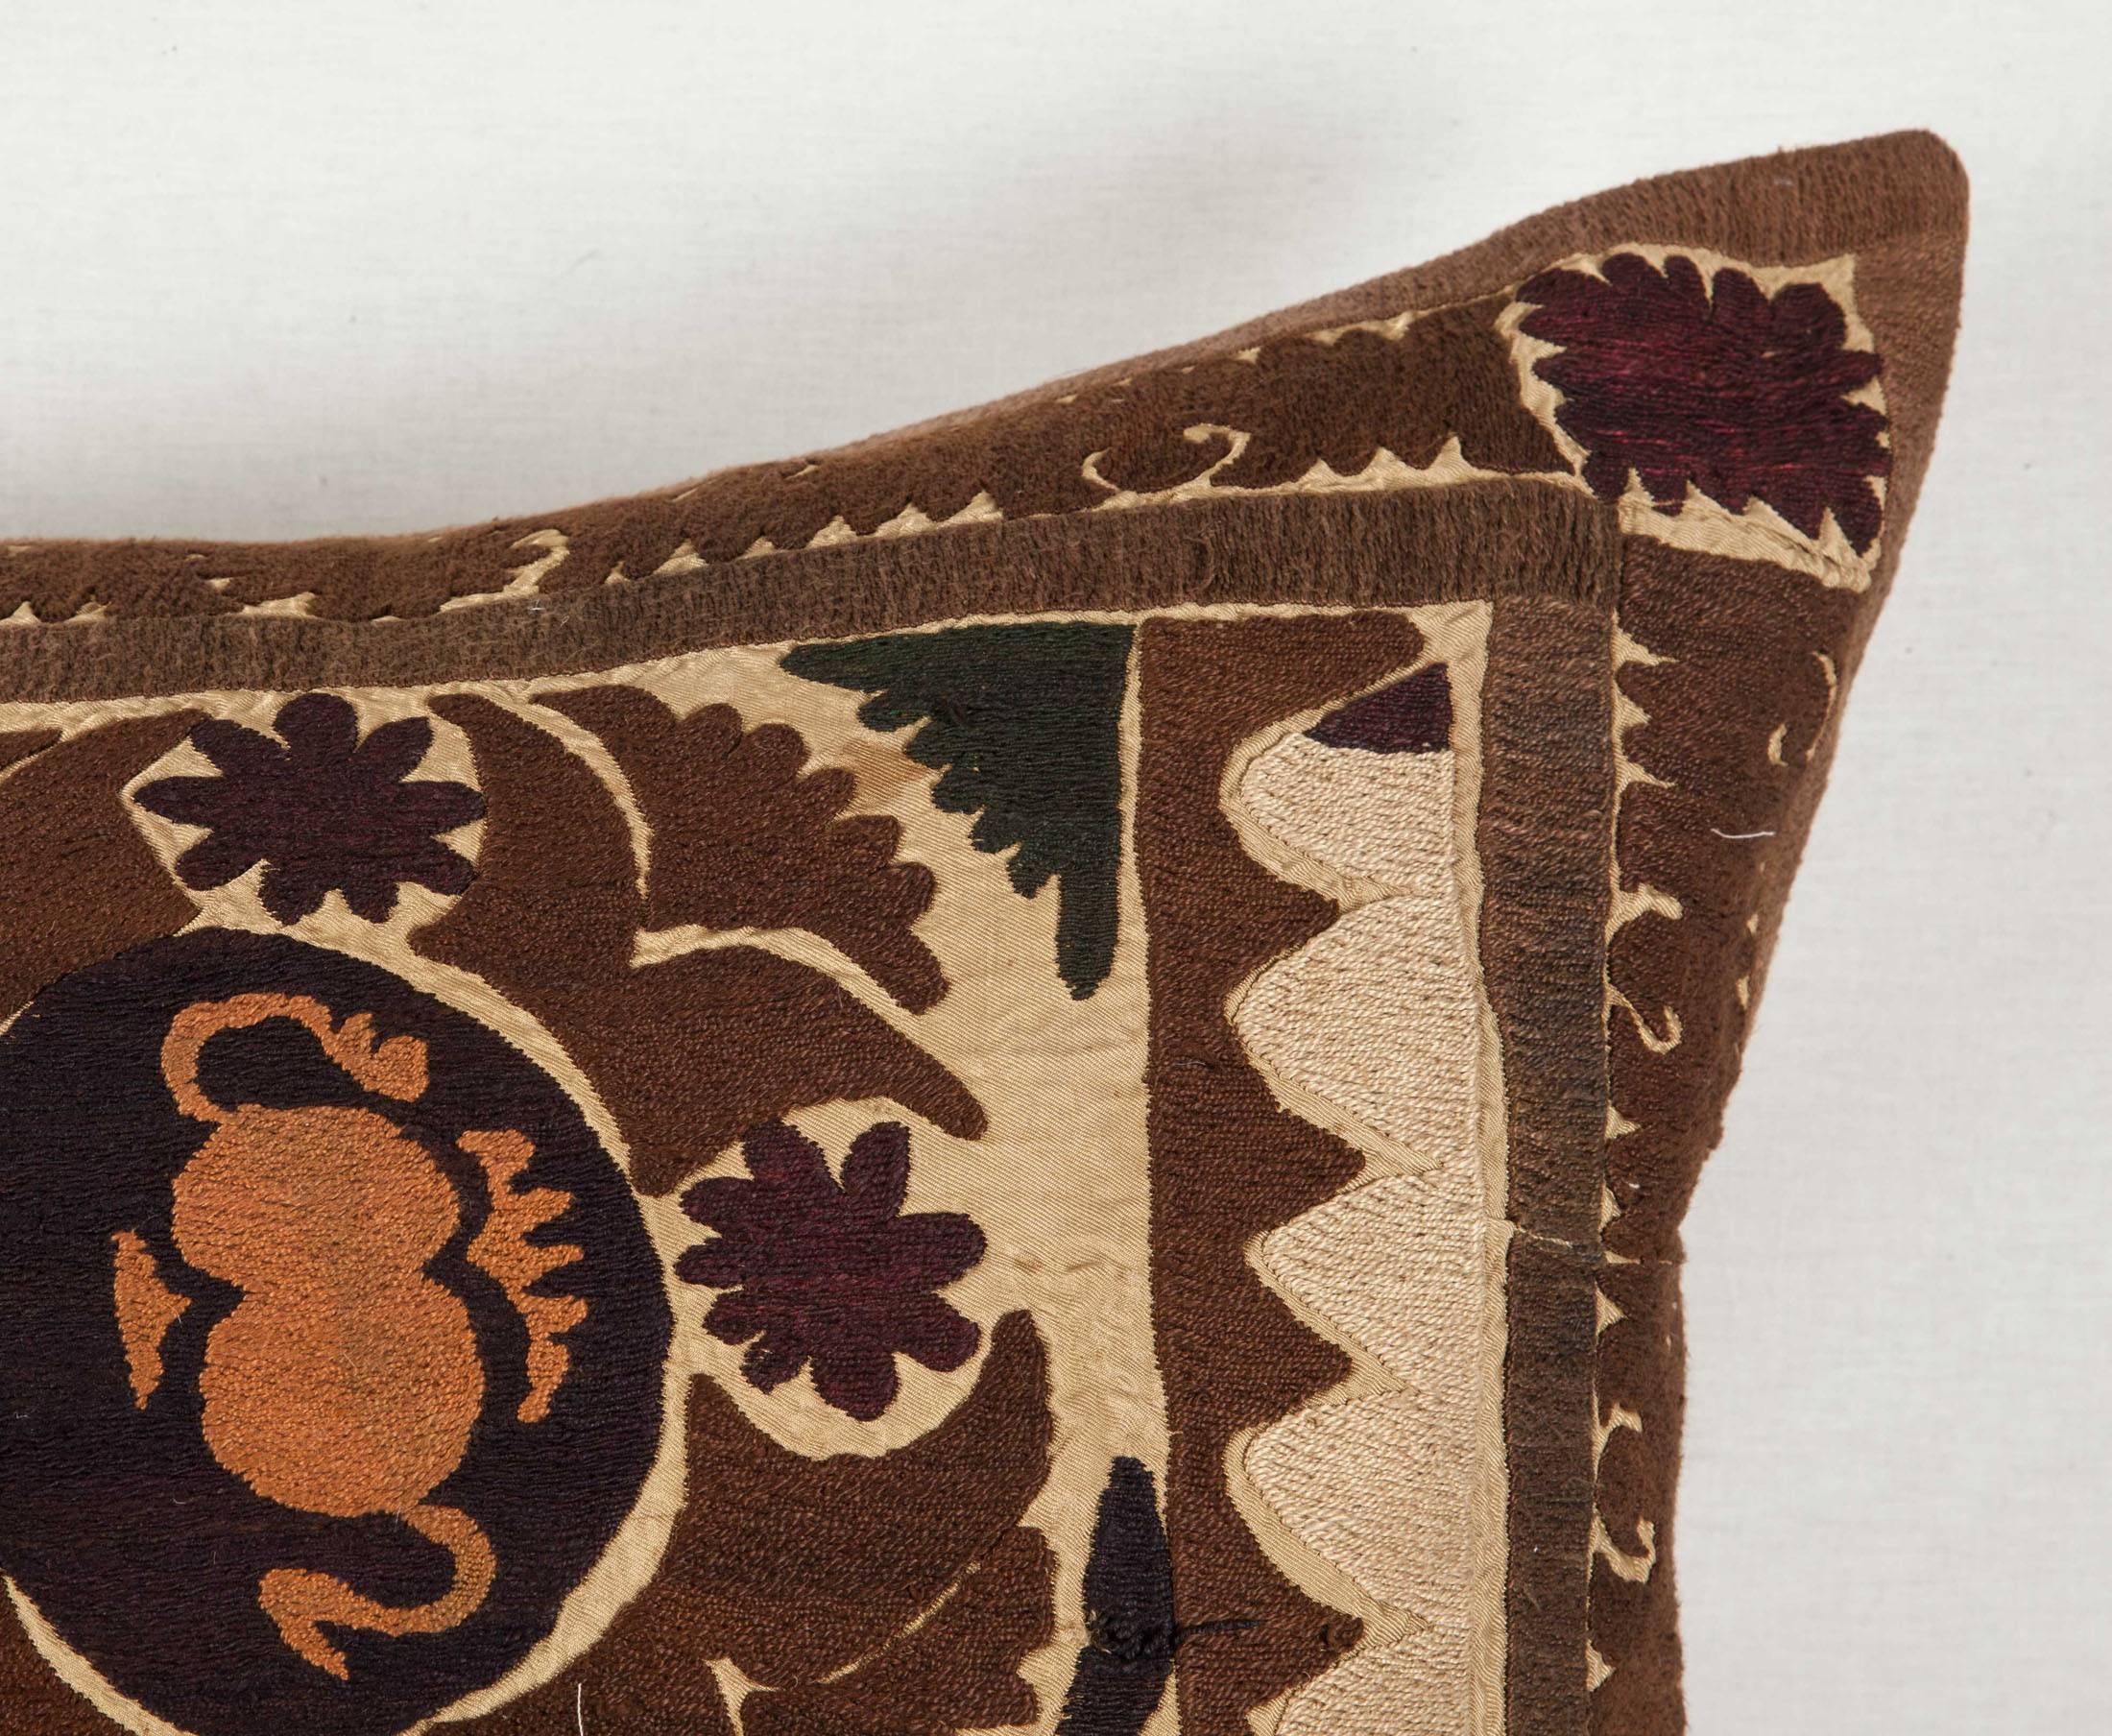 Vintage Uzbek Embroidered Pillow, Central Asia, 1960-1970 In Good Condition For Sale In By Appointment Only, CA